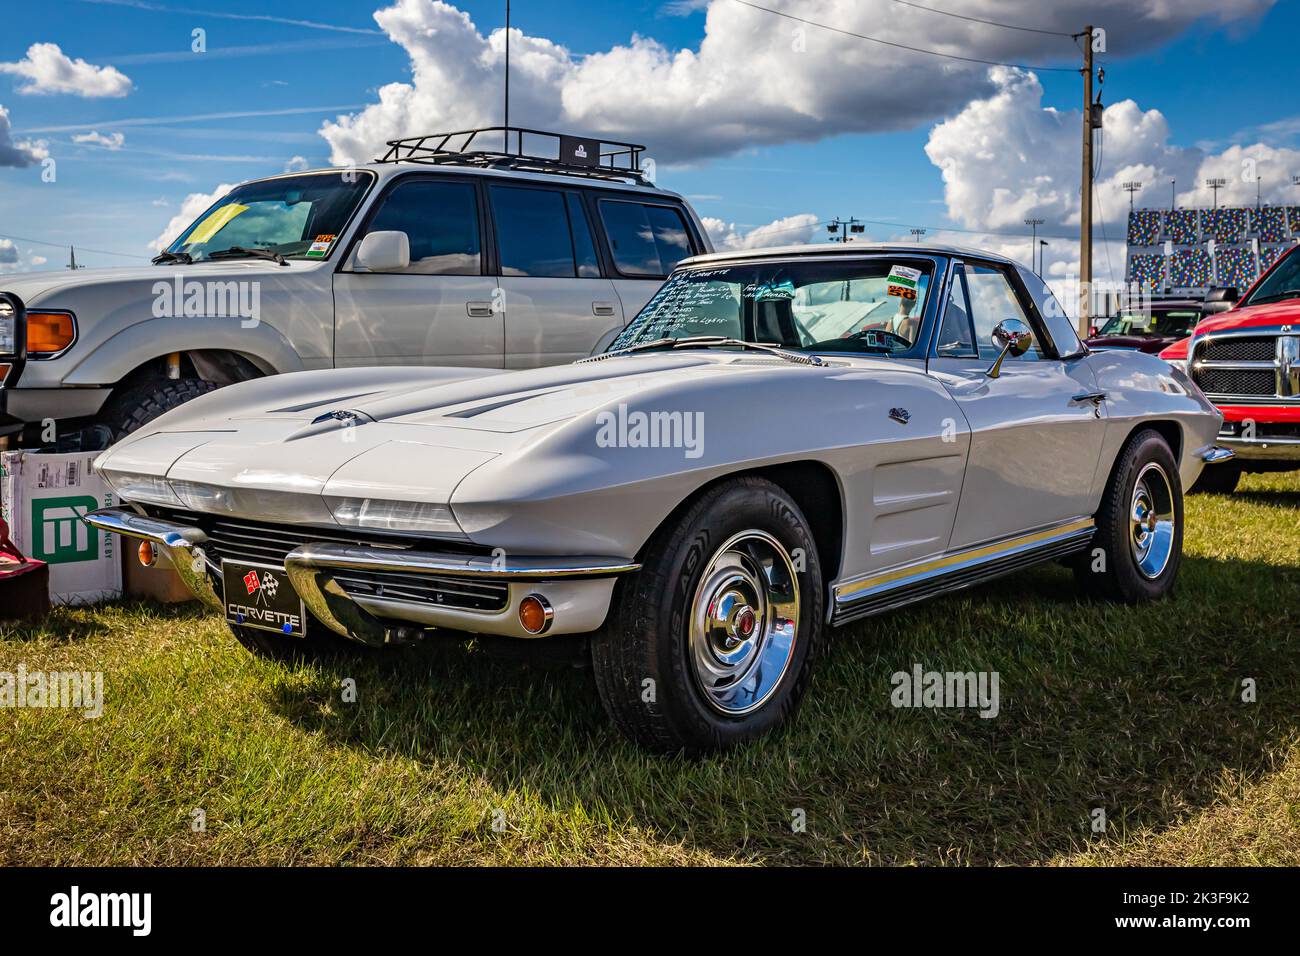 Daytona Beach, FL - November 28, 2020: Low perspective front corner view of a 1964 Chevrolet Corvette Sting Ray Hardtop Coupe at a local car show. Stock Photo